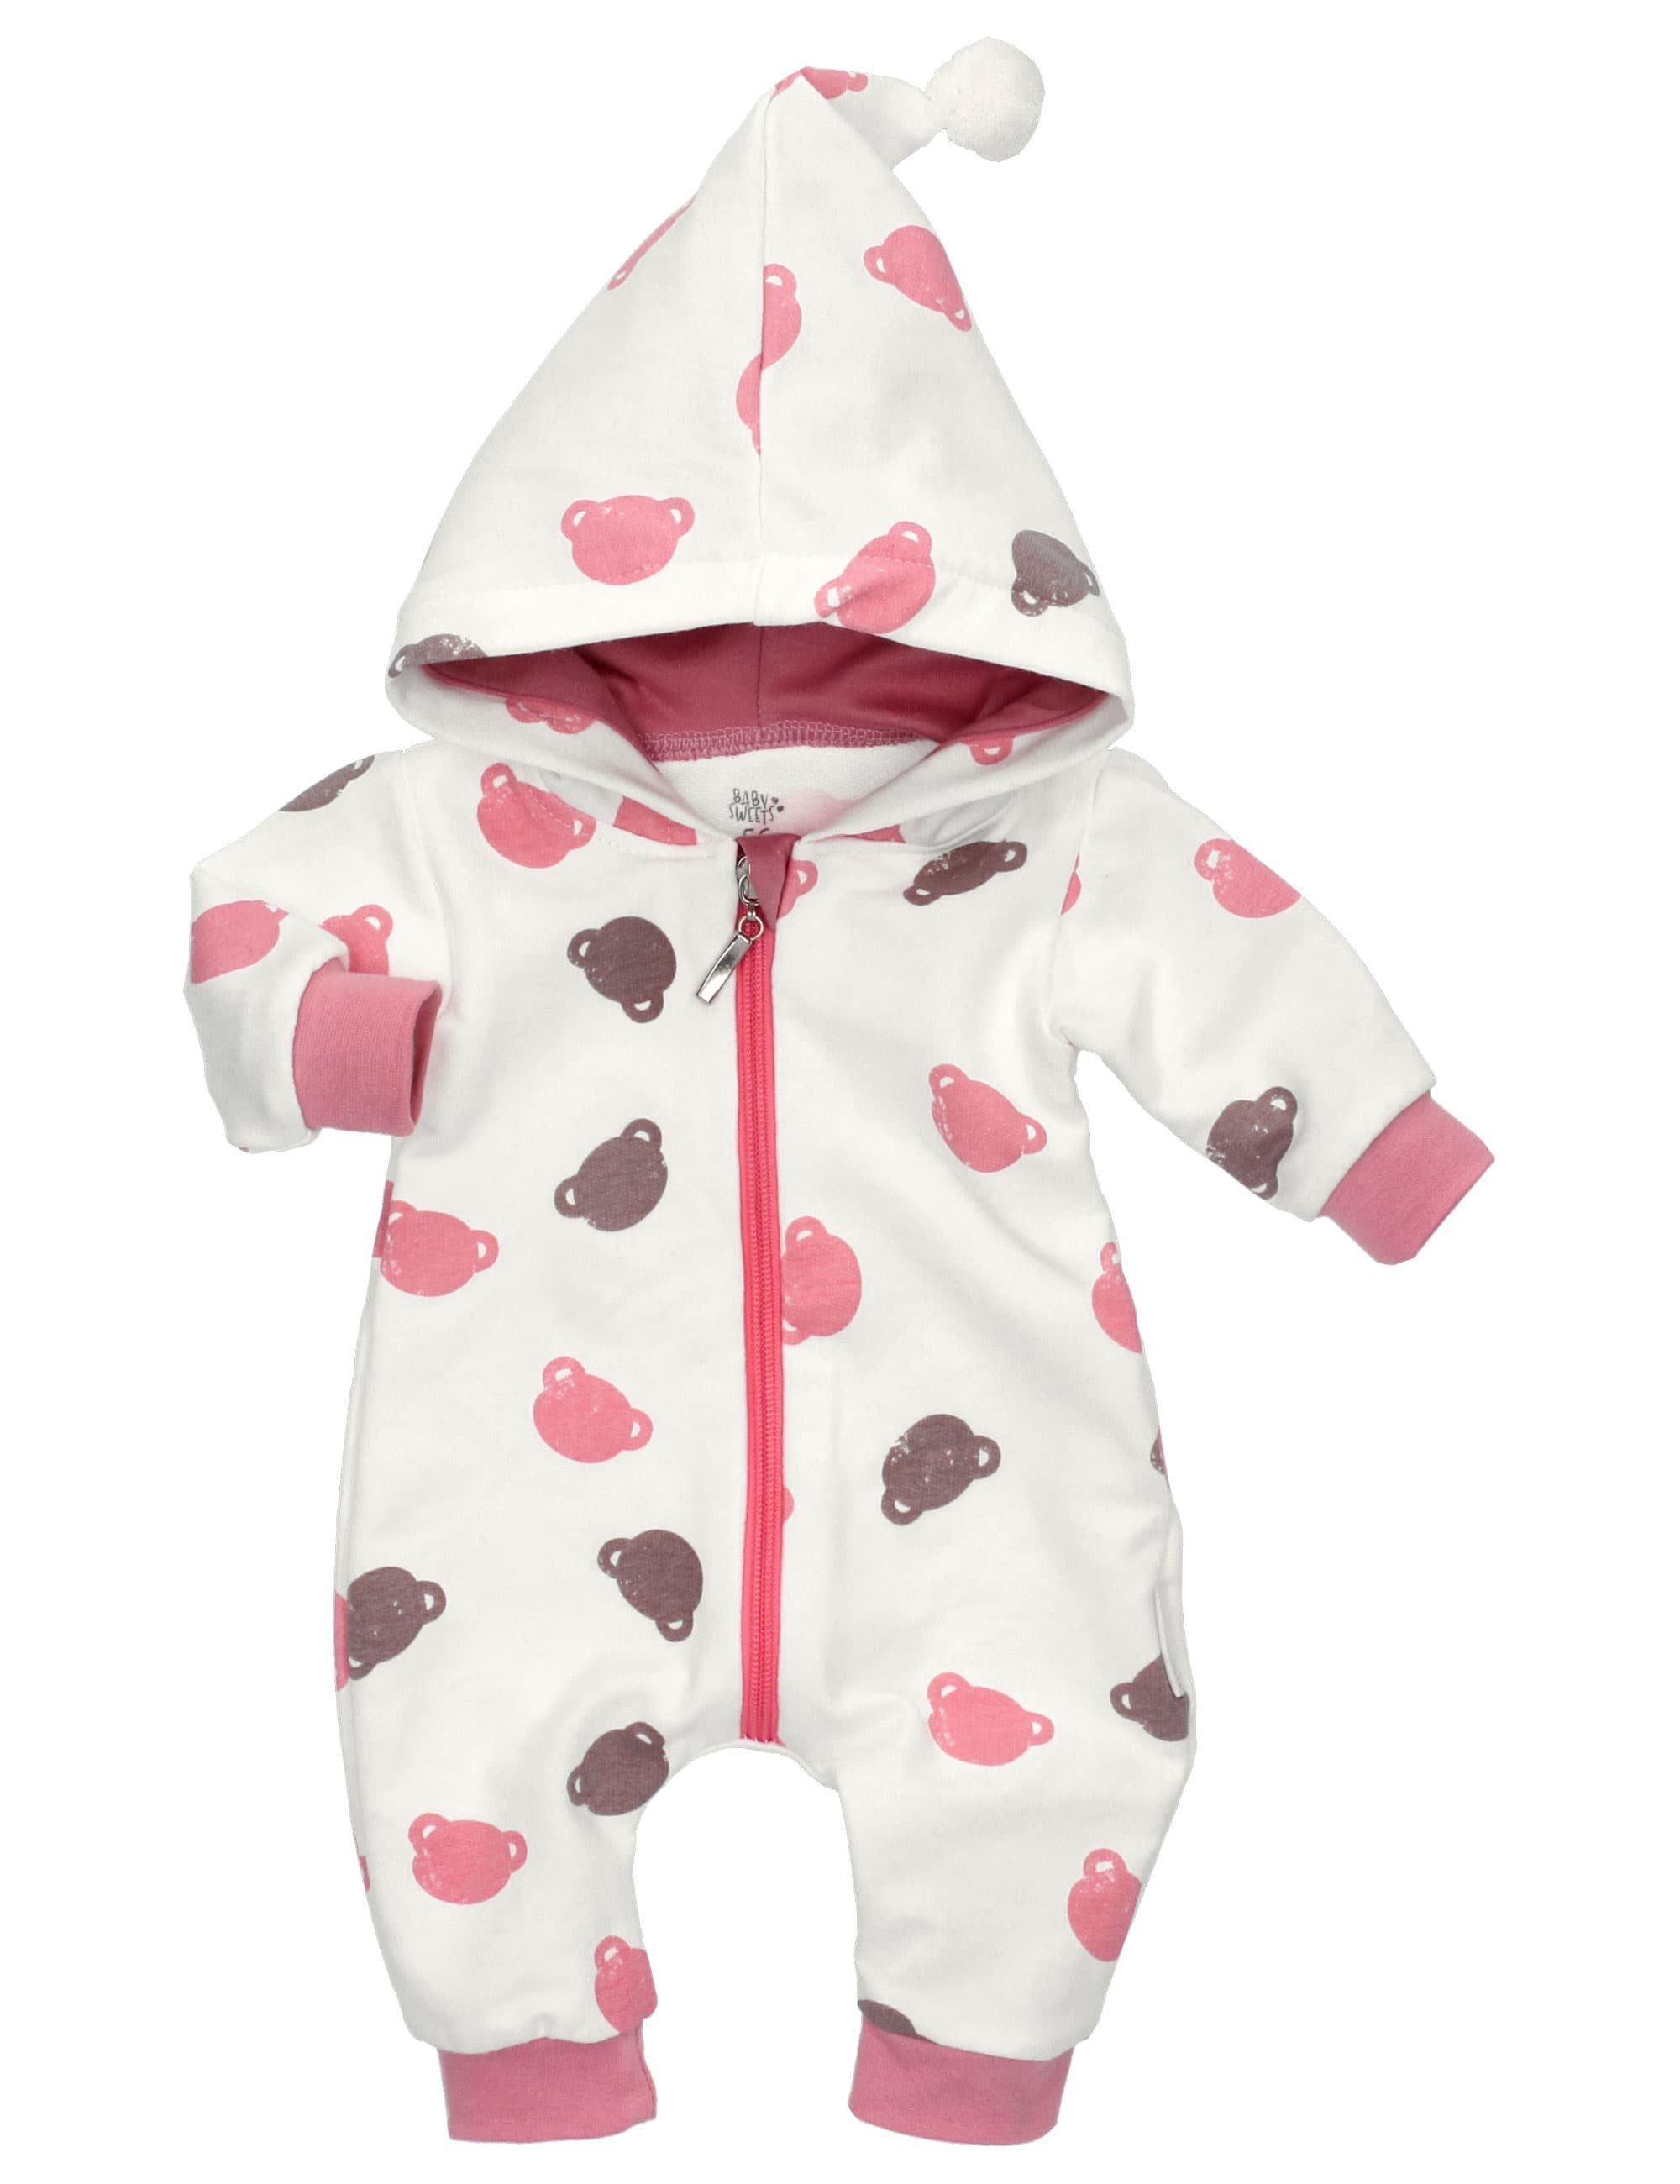 Sweets Baby rosa Koala Overall Overall (1-tlg) Strampler, weiß